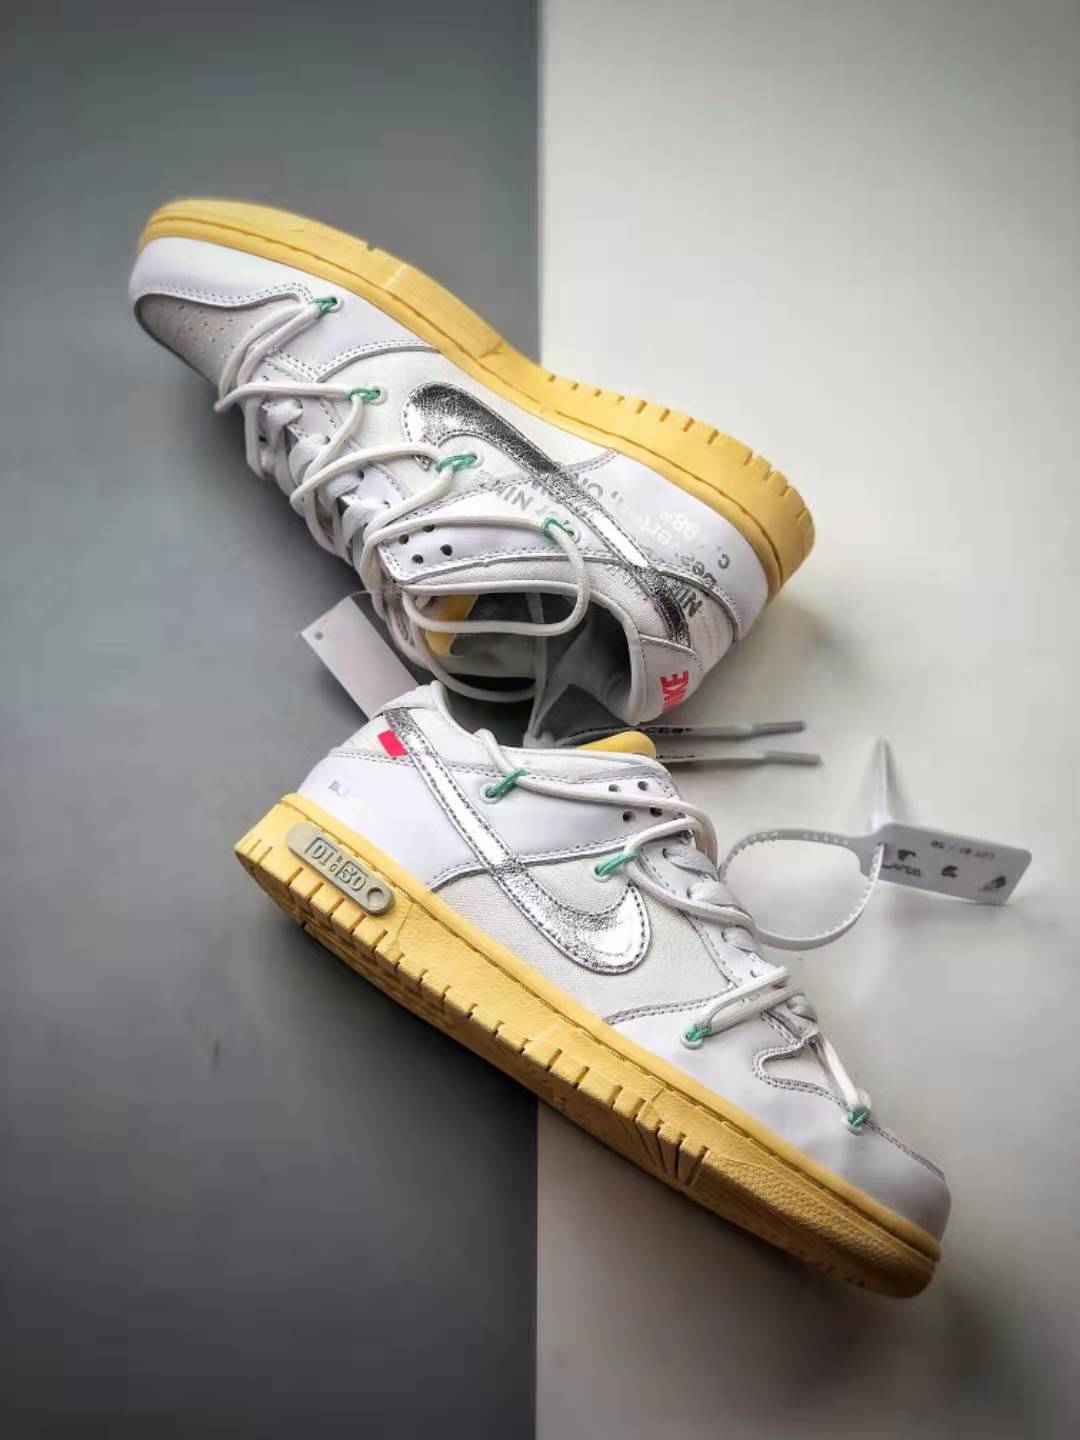 Off-White x Nike SB Dunk Low White Metallic Silver Yellow DM1602-127 - Limited Edition Collaboration Sneakers